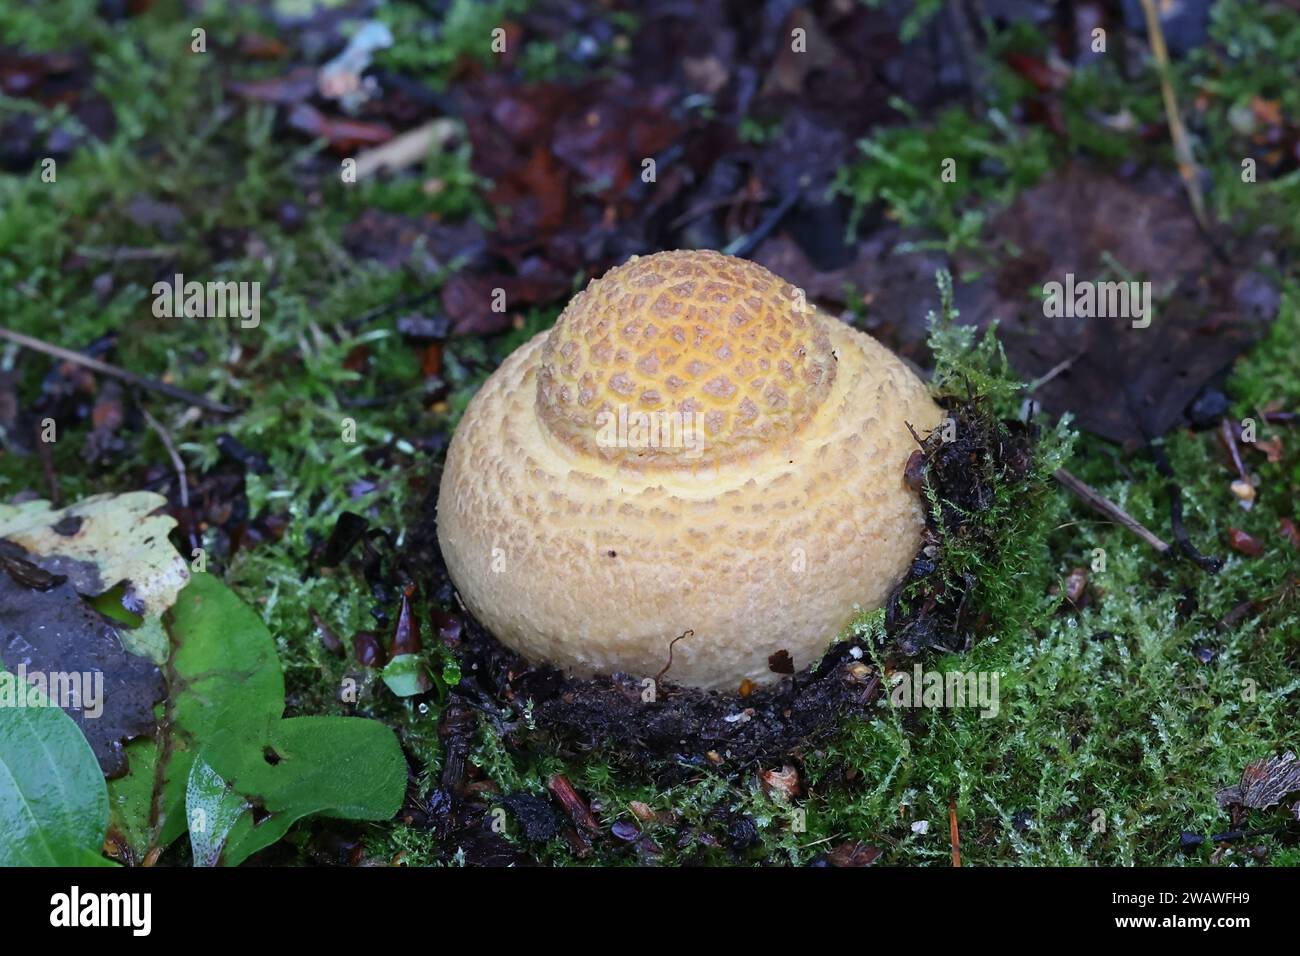 Very young Amanita muscaria, commonly known as the fly agaric or fly amanita, poisonous mushroom from Finland Stock Photo